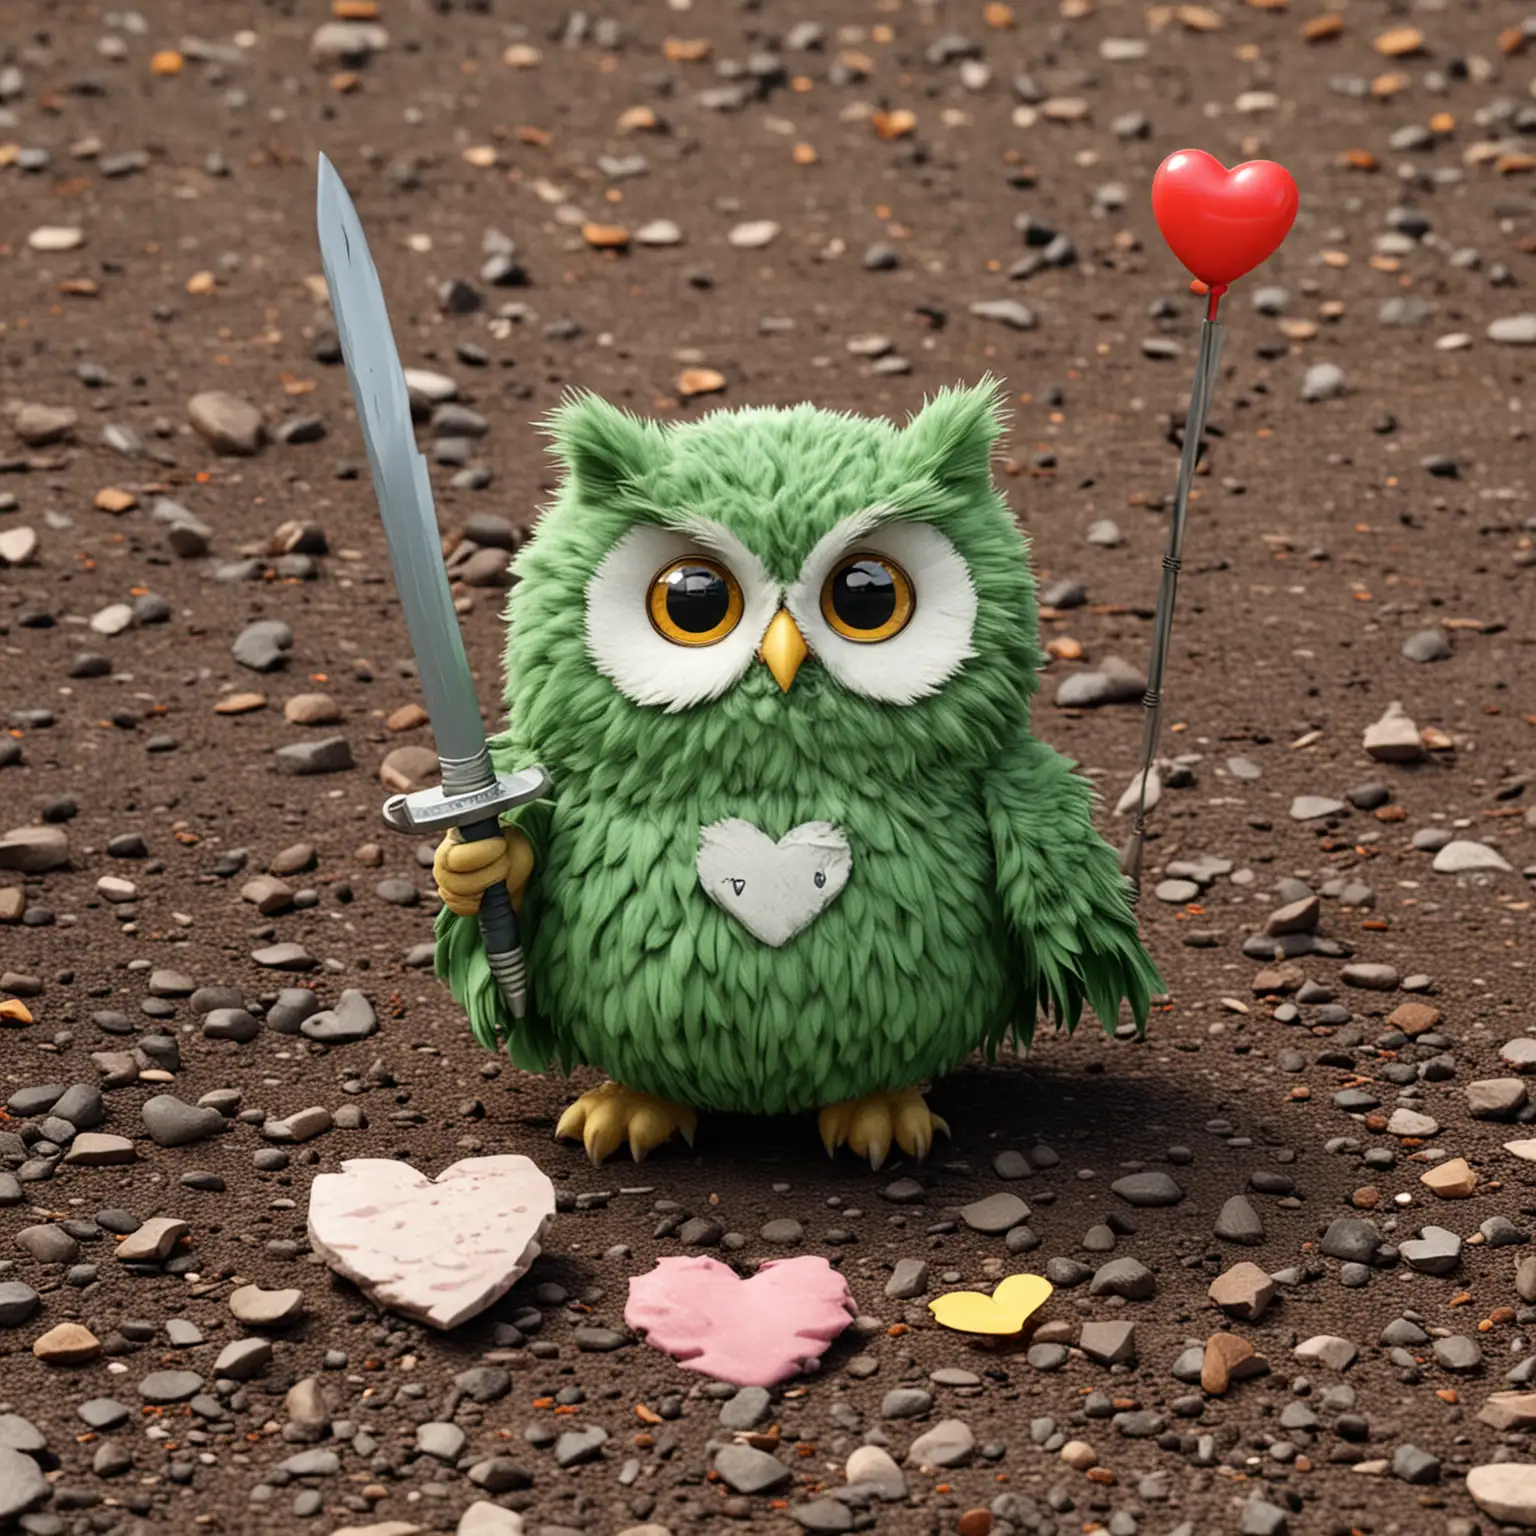 round round's, cute owl cat, feather has heart pattern, emoticon, cartoon, extremely simple, a green owl cat inserted sword into ground